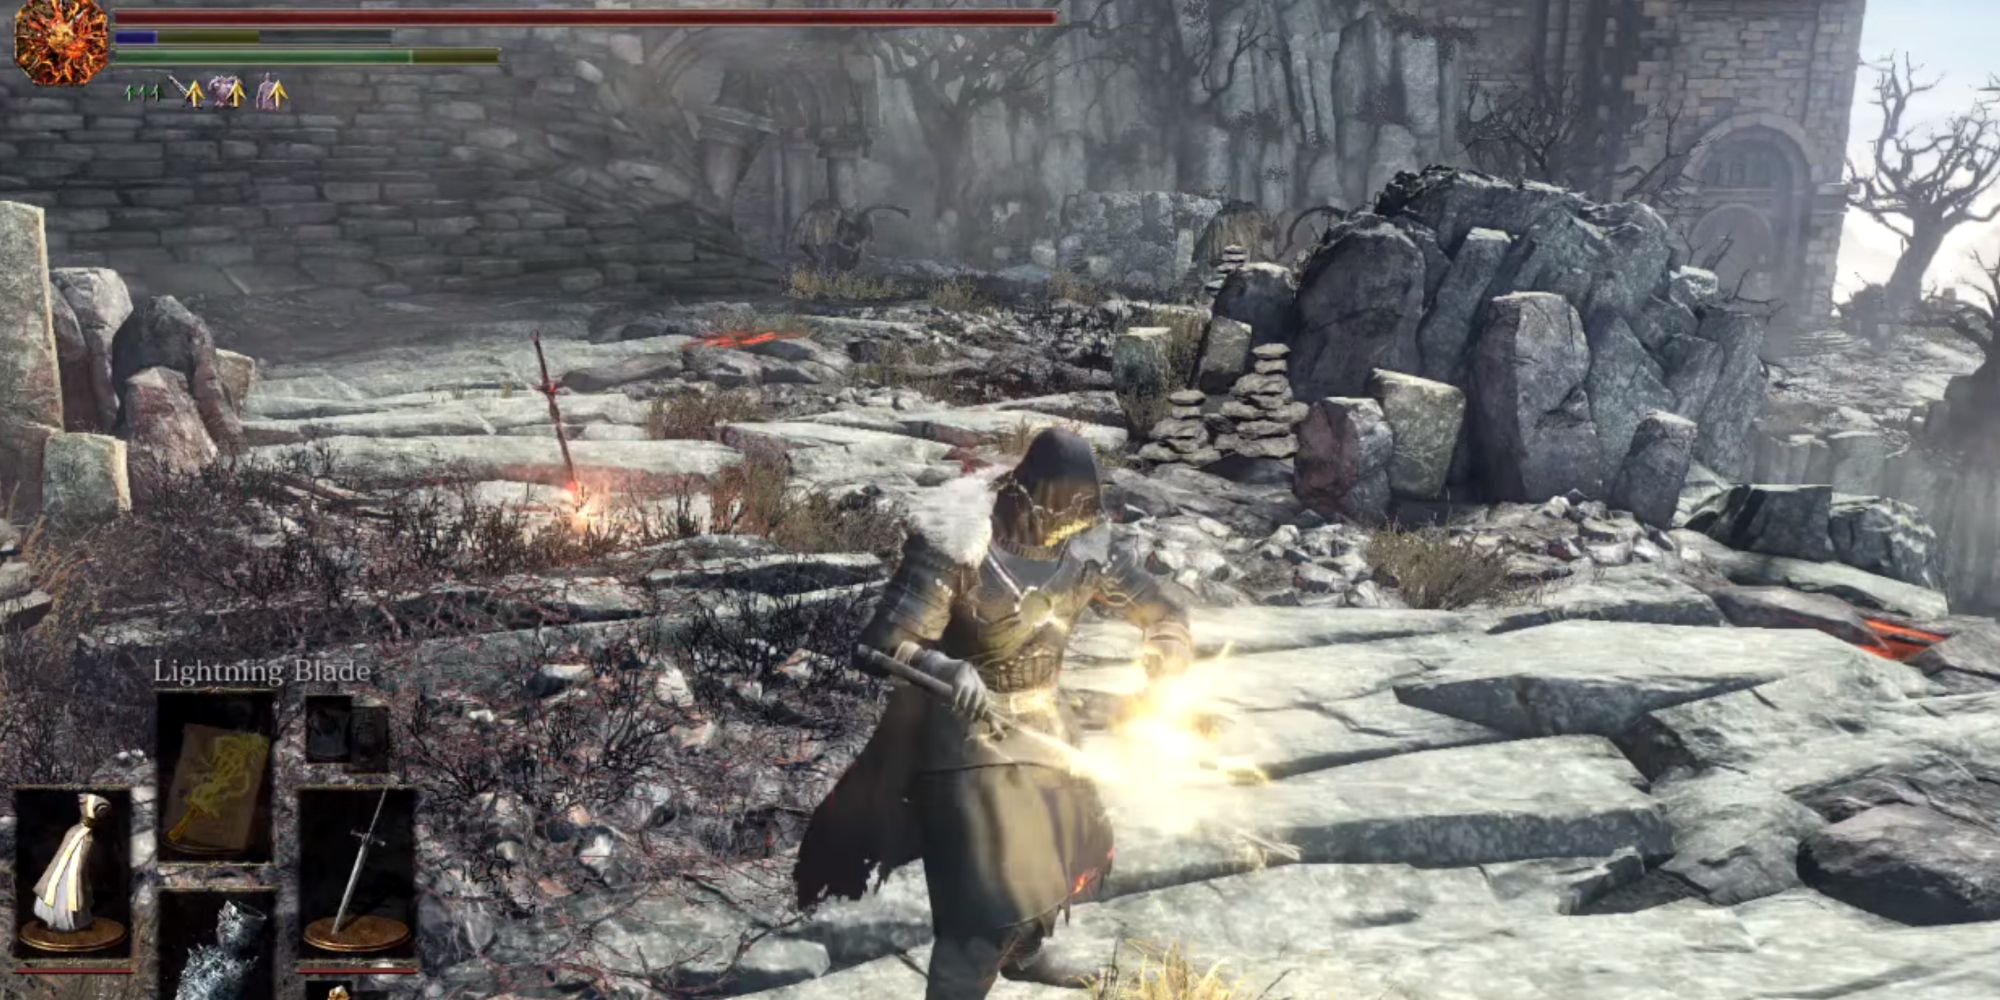 The player applying Lightning Blade on the weapon.